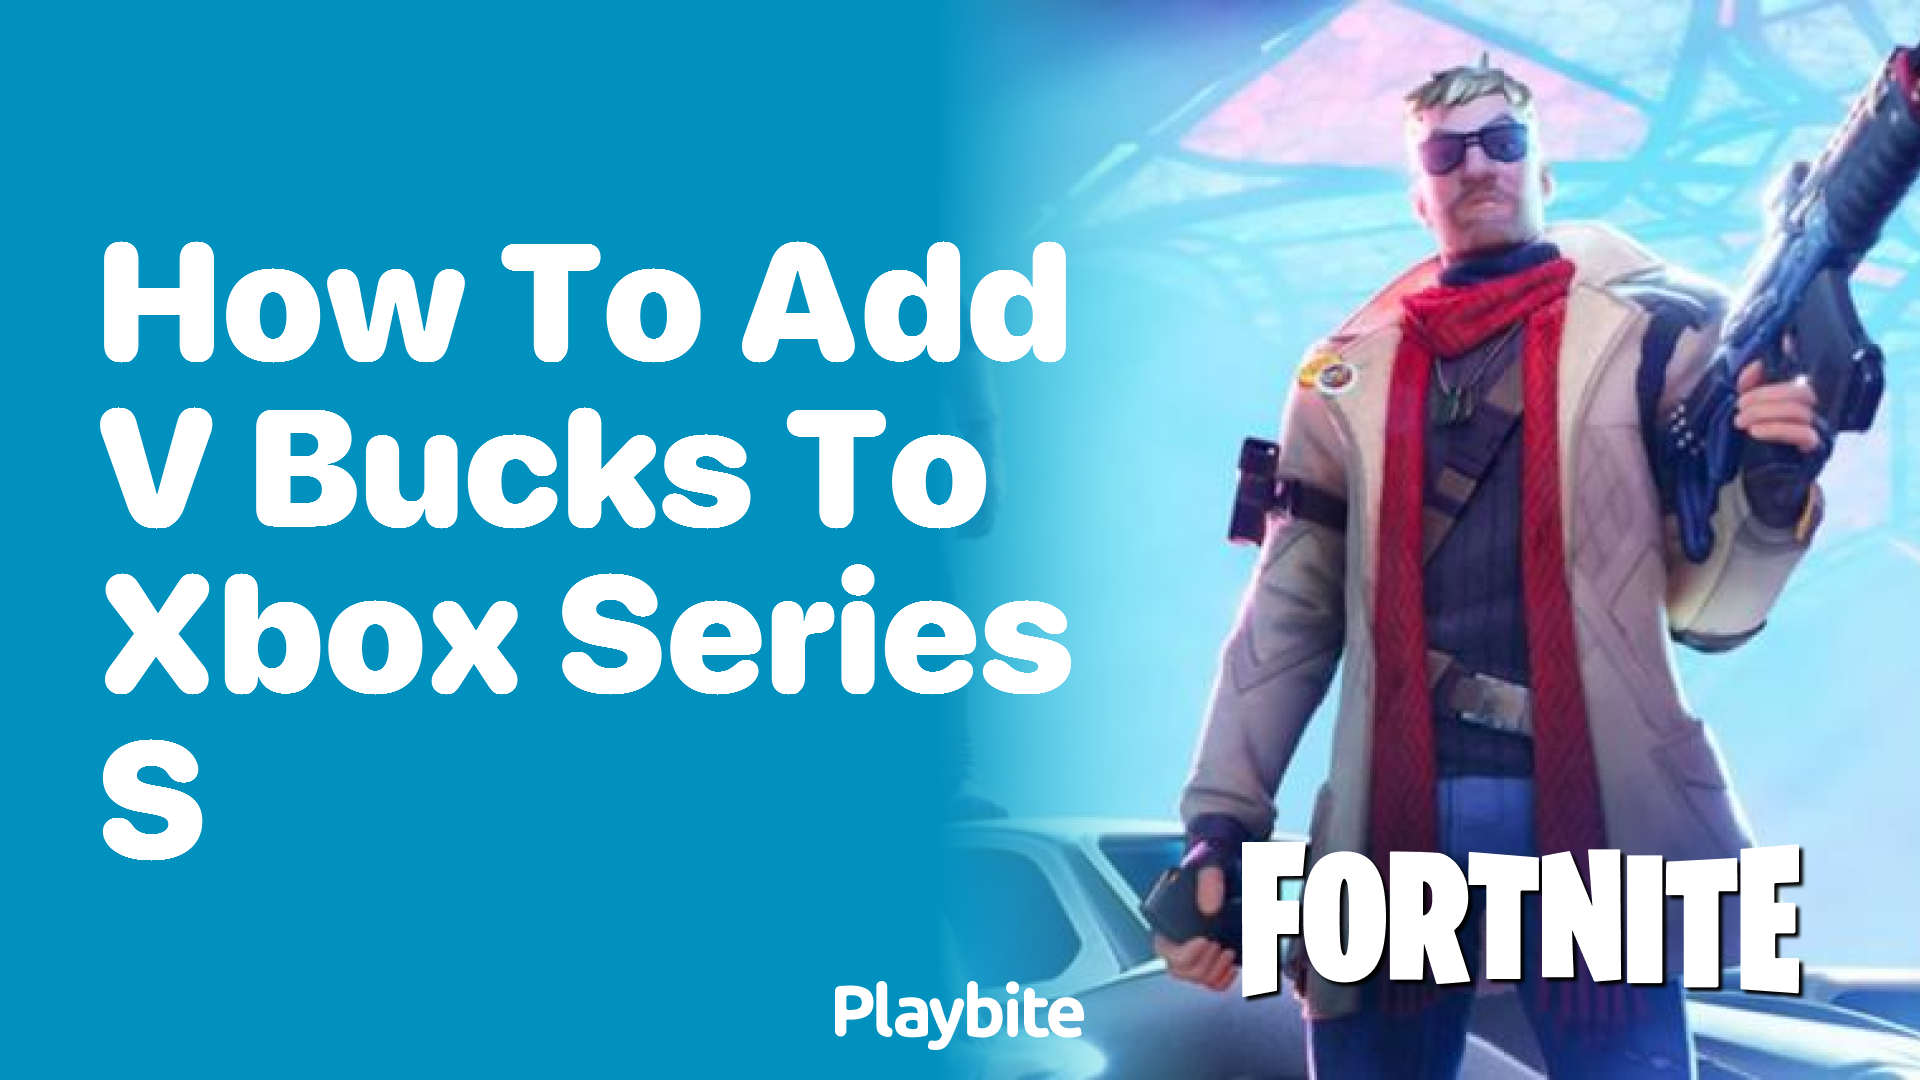 How to Redeem Xbox Gift Card then Buy Fortnite V-Bucks on Xbox Series X/S 